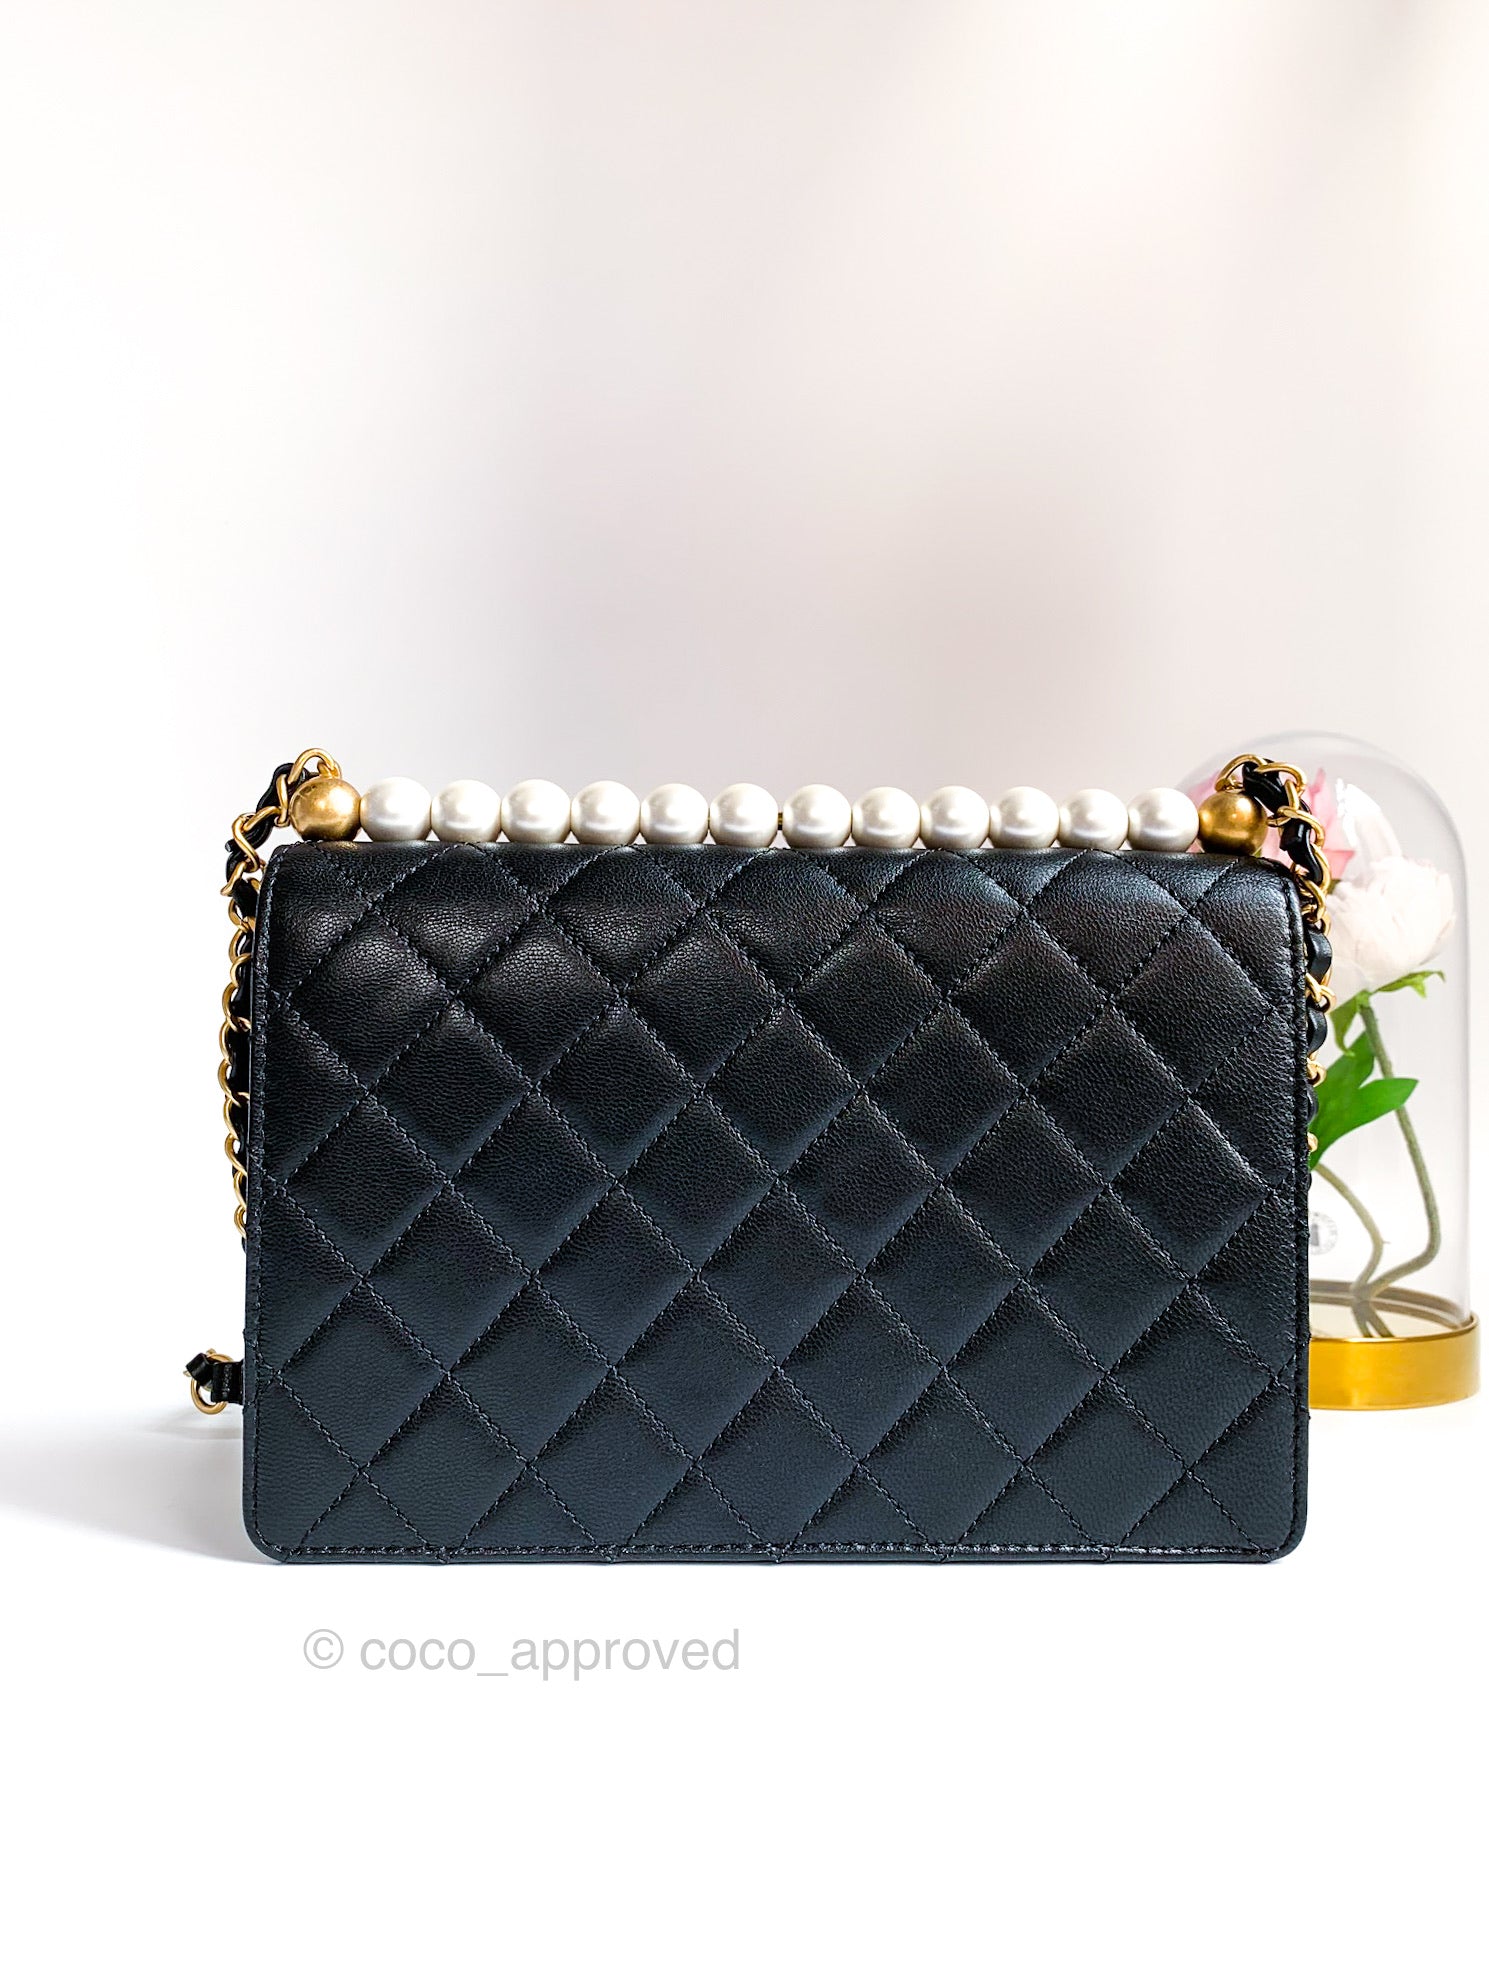 CHANEL  BLACK CHIC PEARLS SMALL FLAP BAG IN GOATSKIN LEATHER